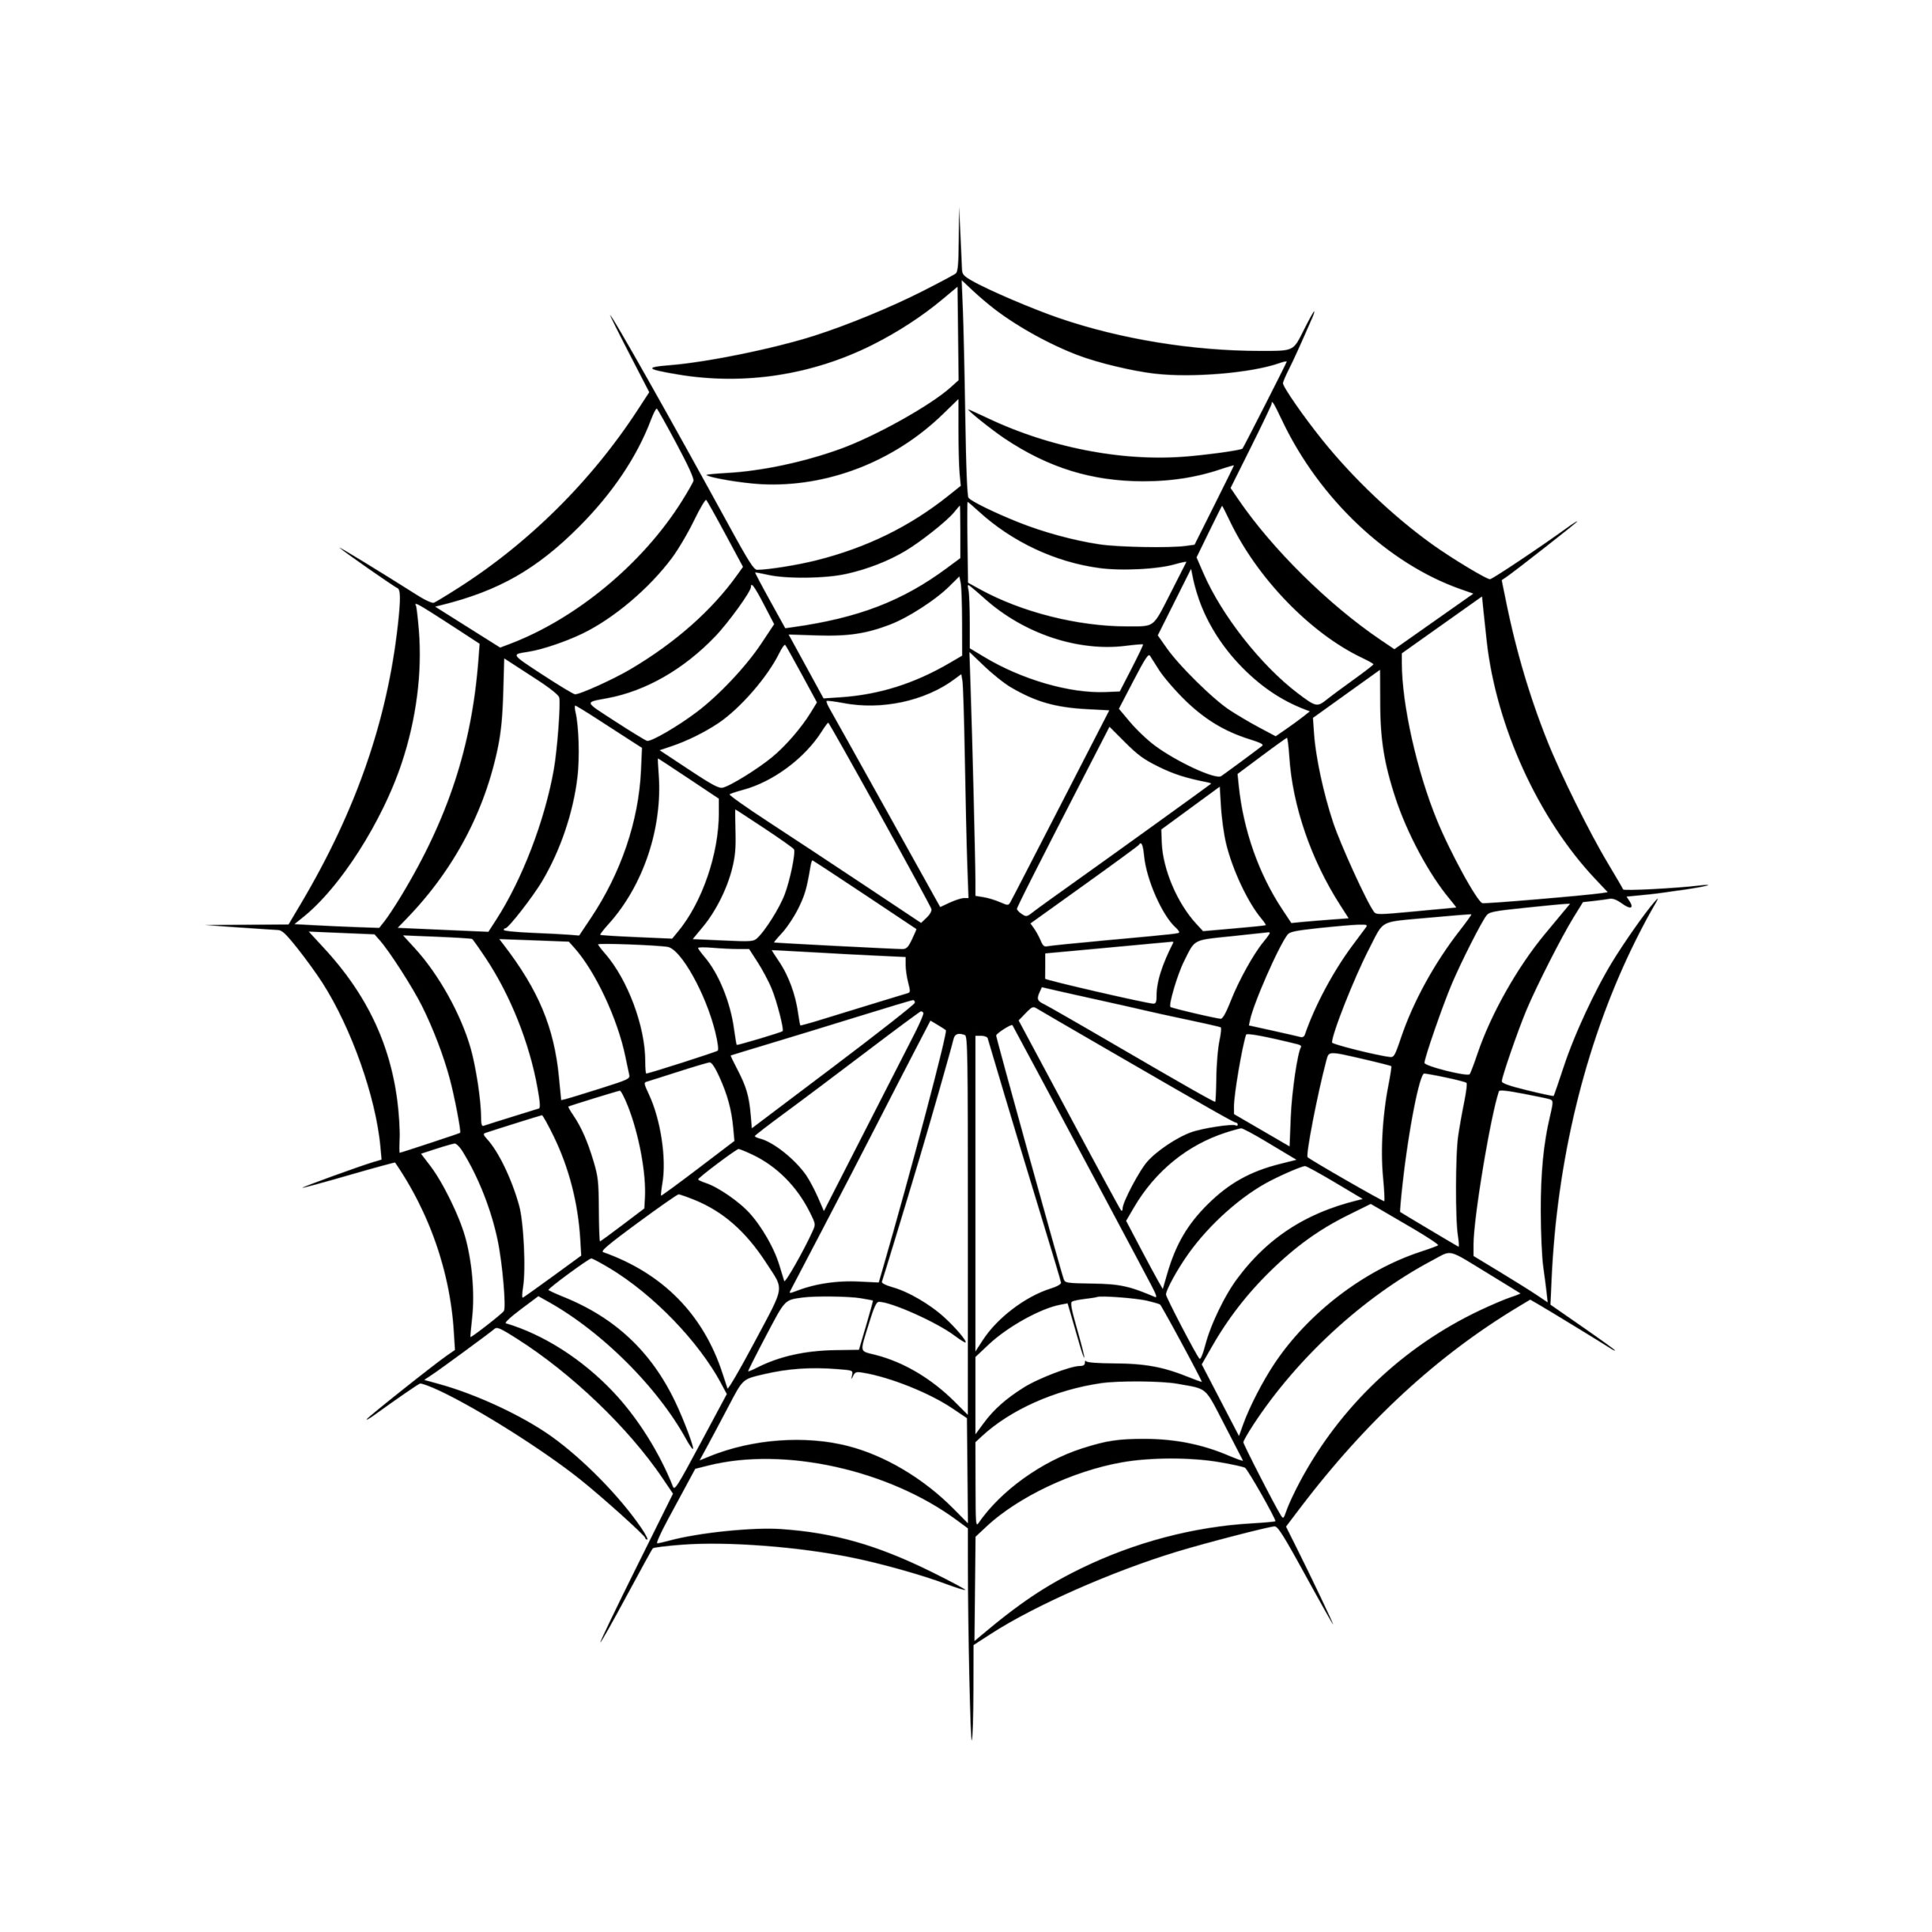 Spiders and Spider Web SVG Files for Silhouette Cameo and Cricut